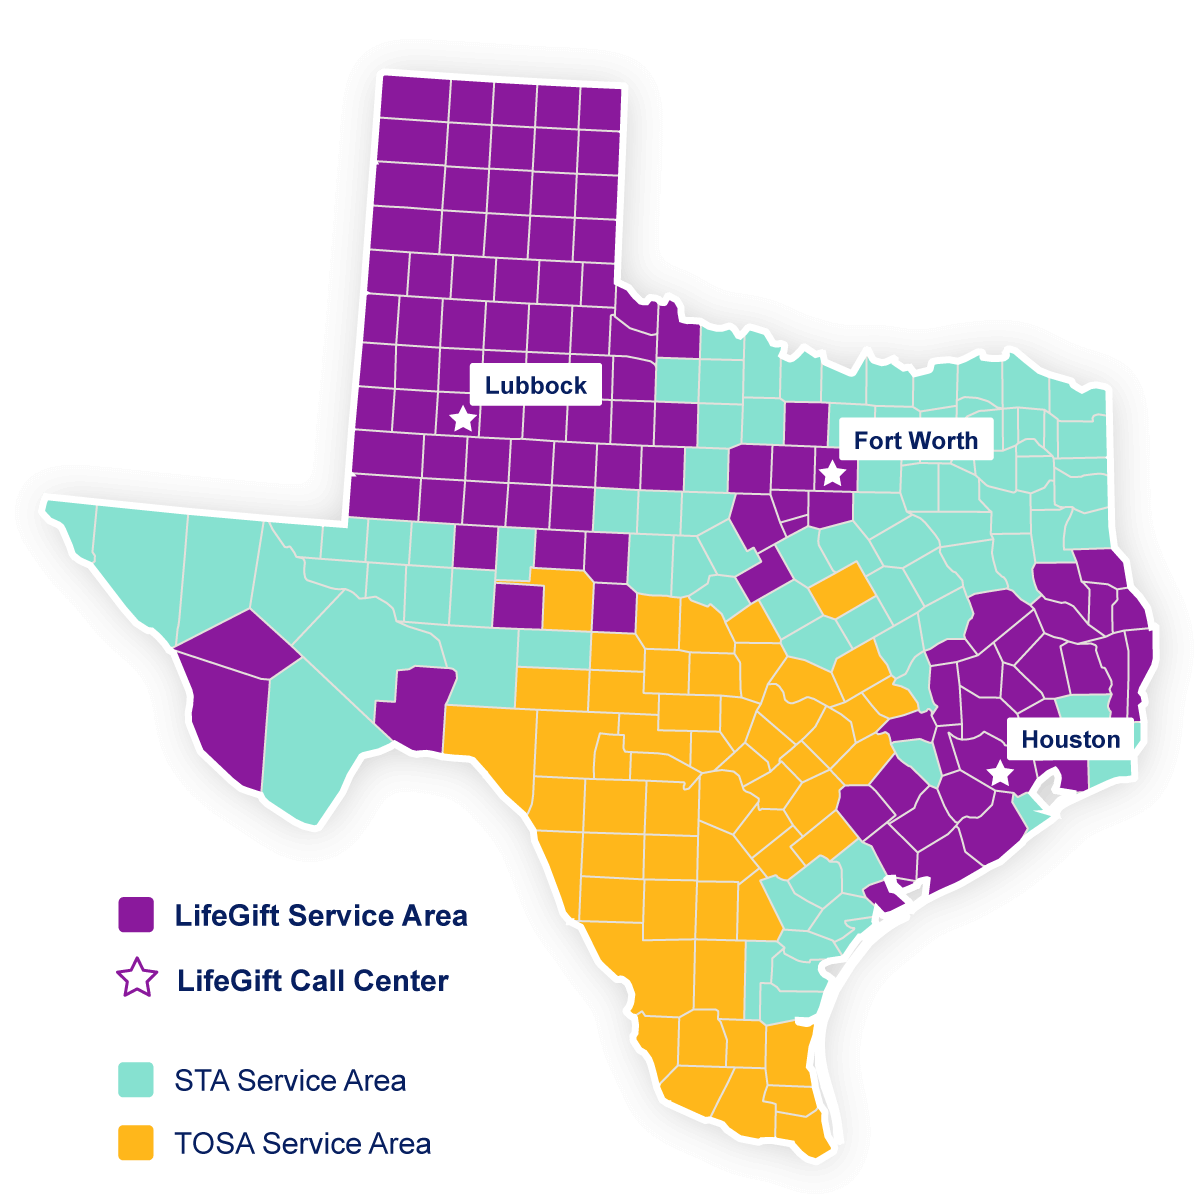 Map of Texas indicating LifeGift service areas